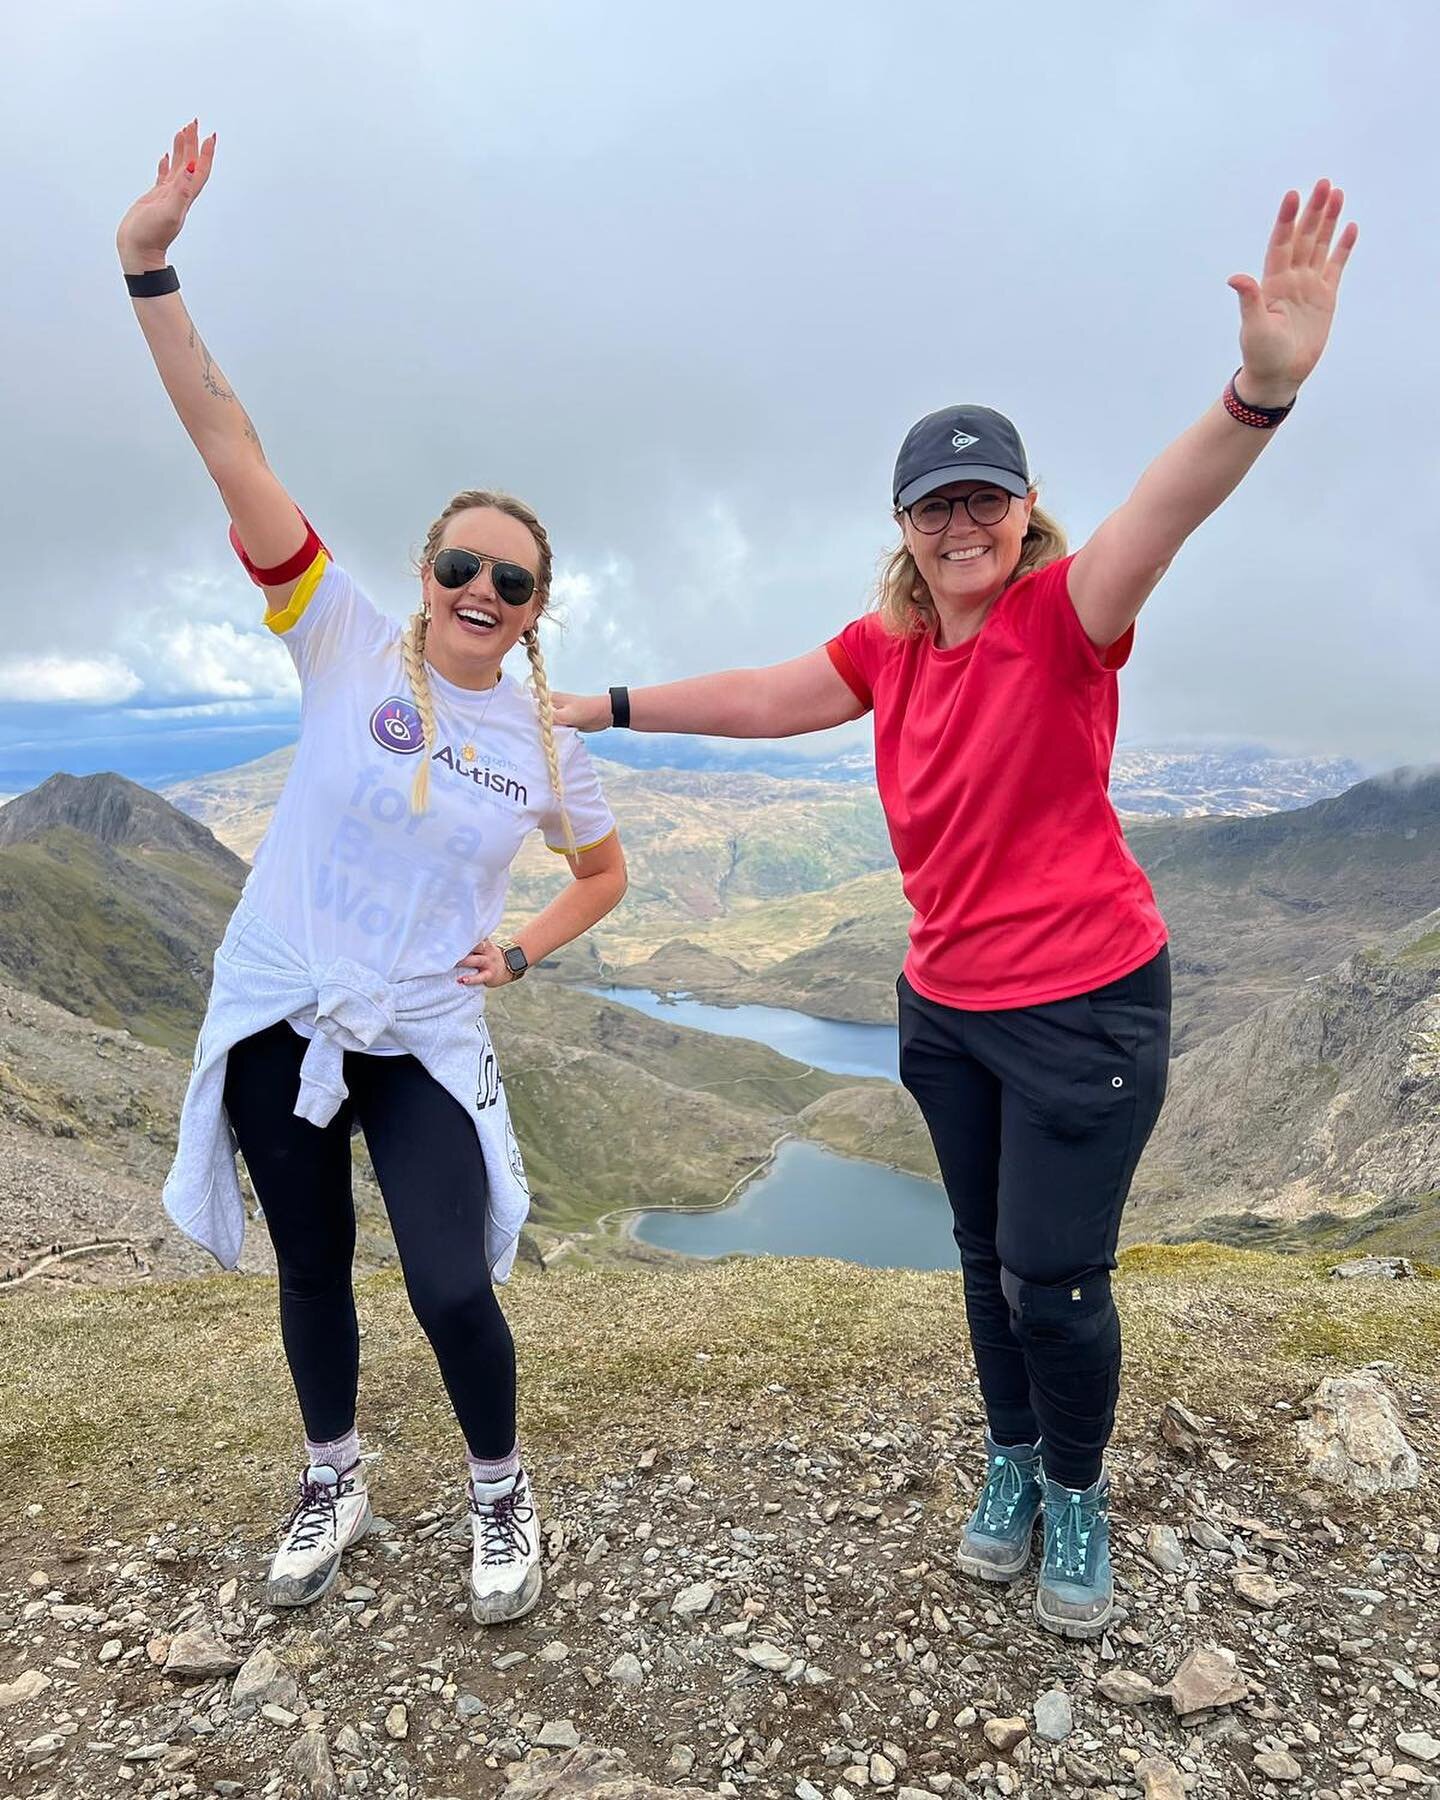 🥳This was one of the many moments of celebration yesterday after reaching the summit of Snowdon 🗻with my great friend + biz 🤠 @kirstykianifard in aid of @wakinguptoautism 💜btw I&rsquo;m not going to lie it was f*cking hard! 😝🤣

It was also beau